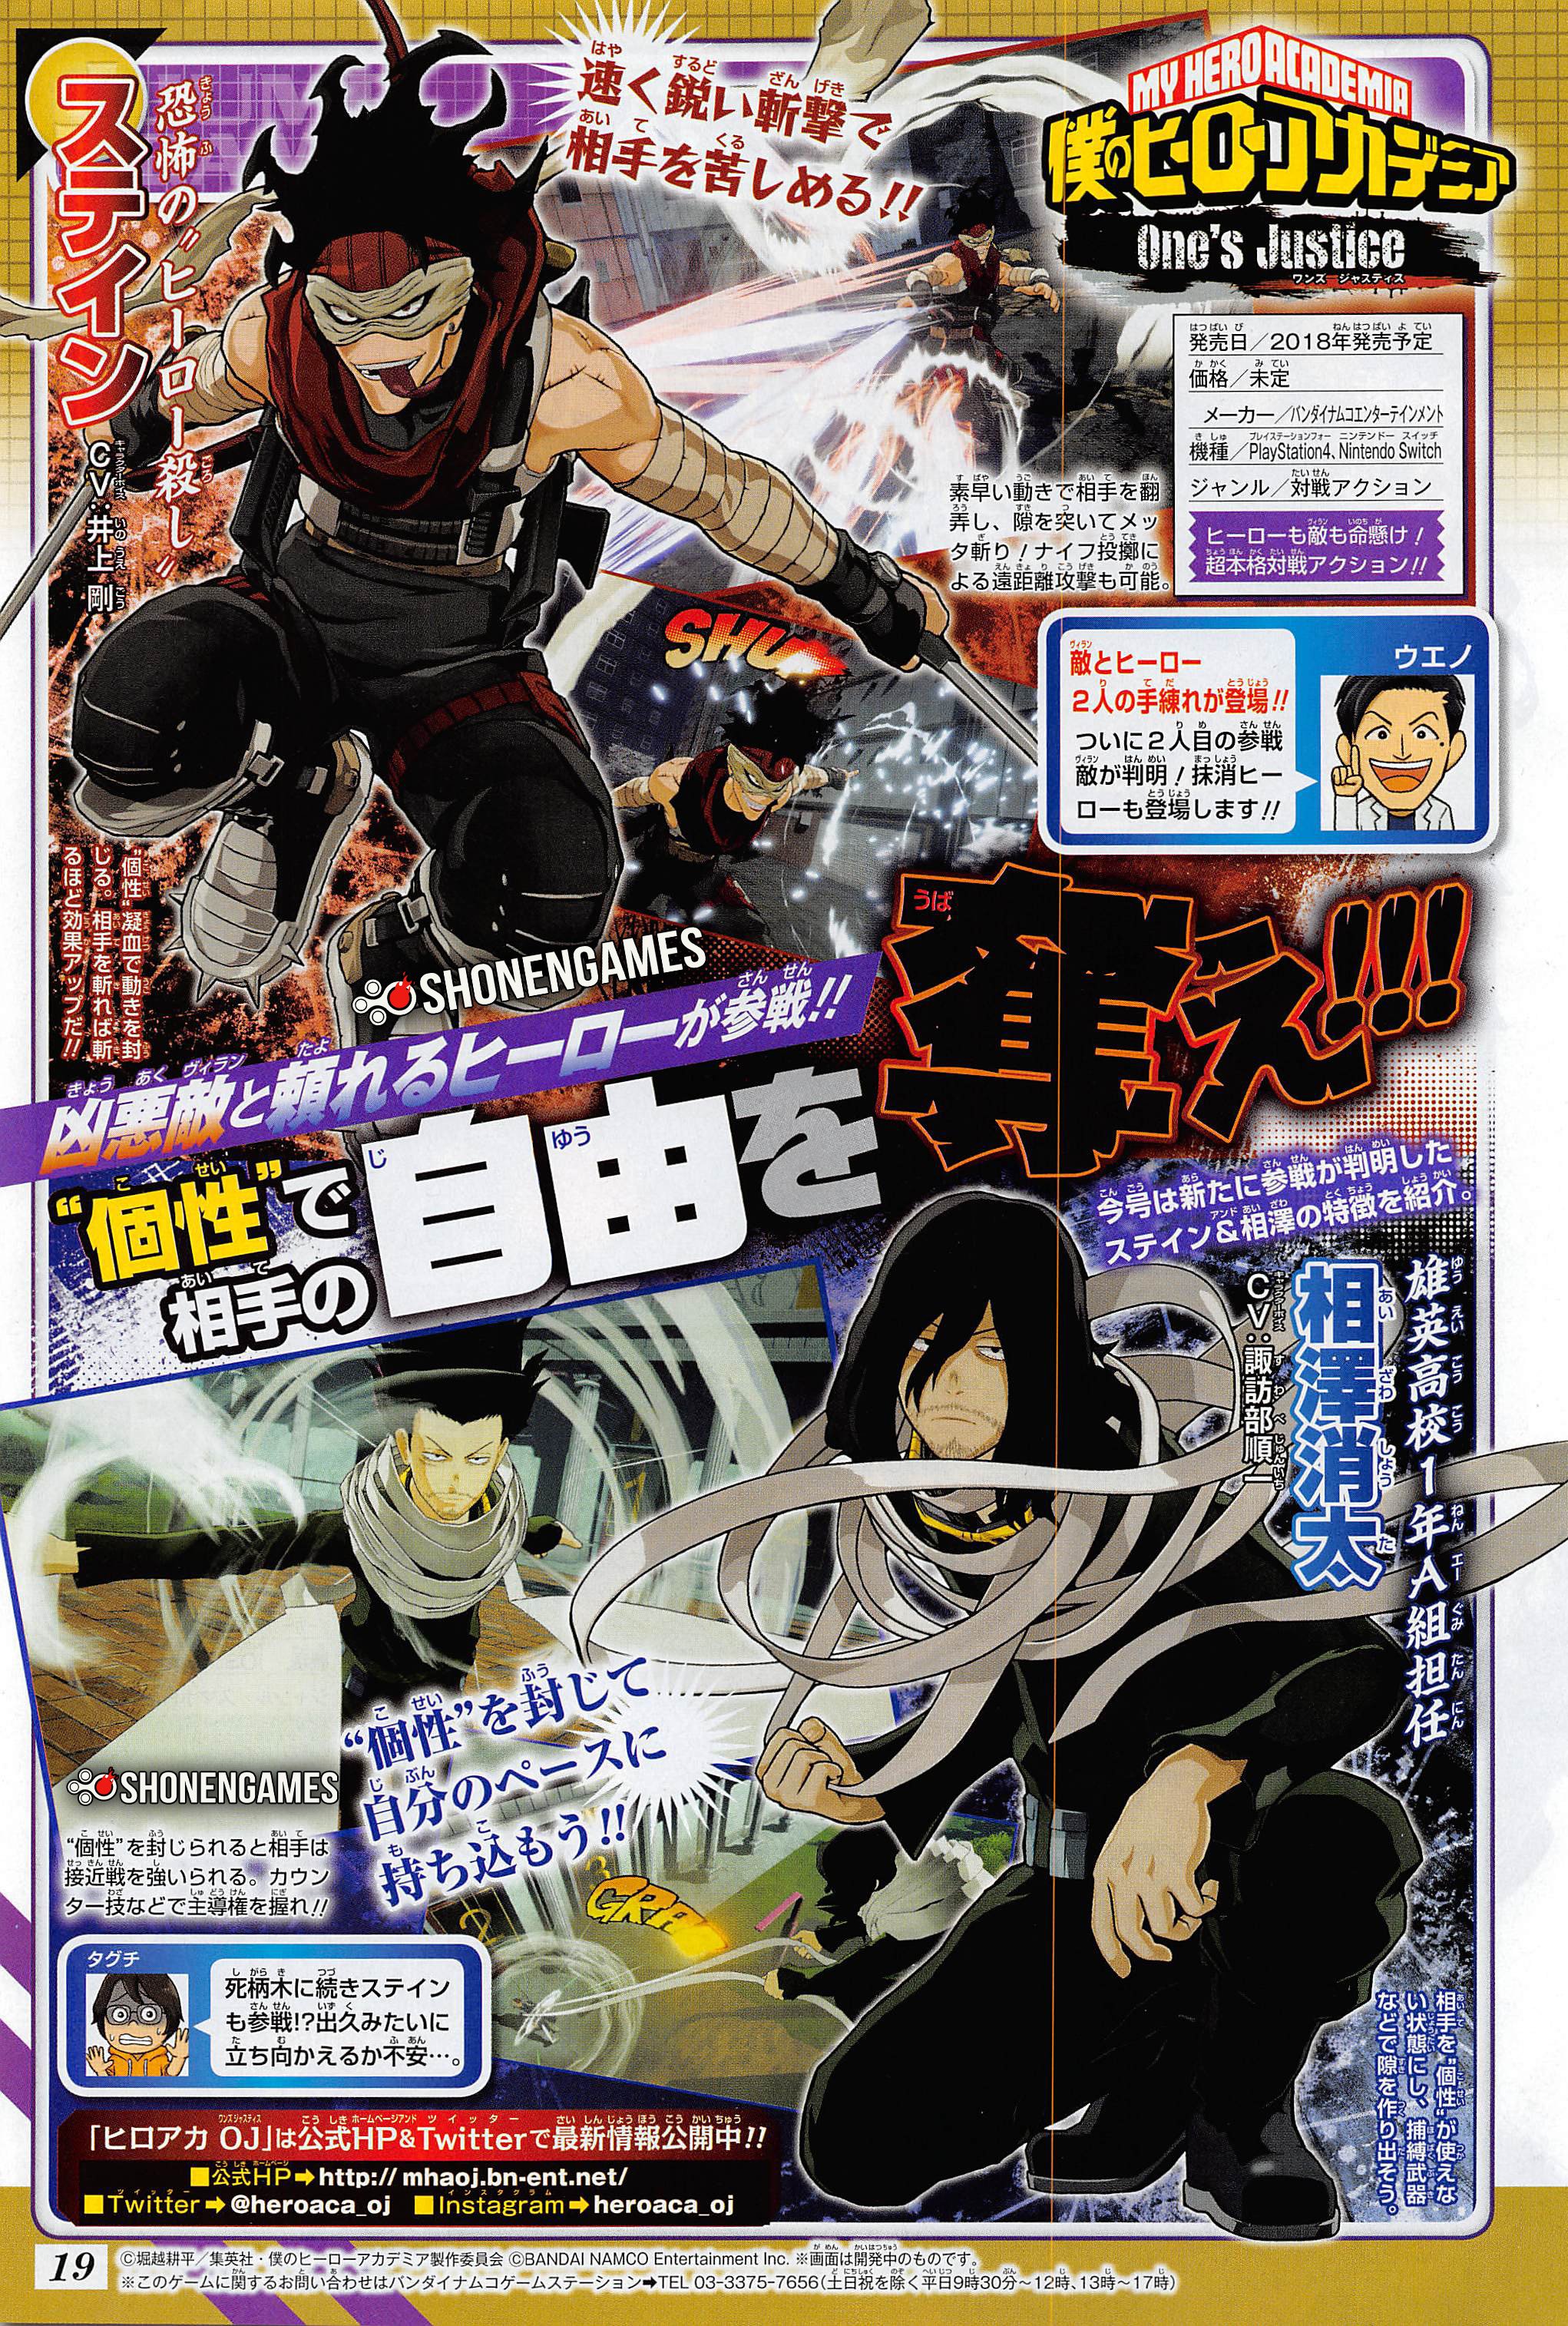 my hero academia ones justice two new characters